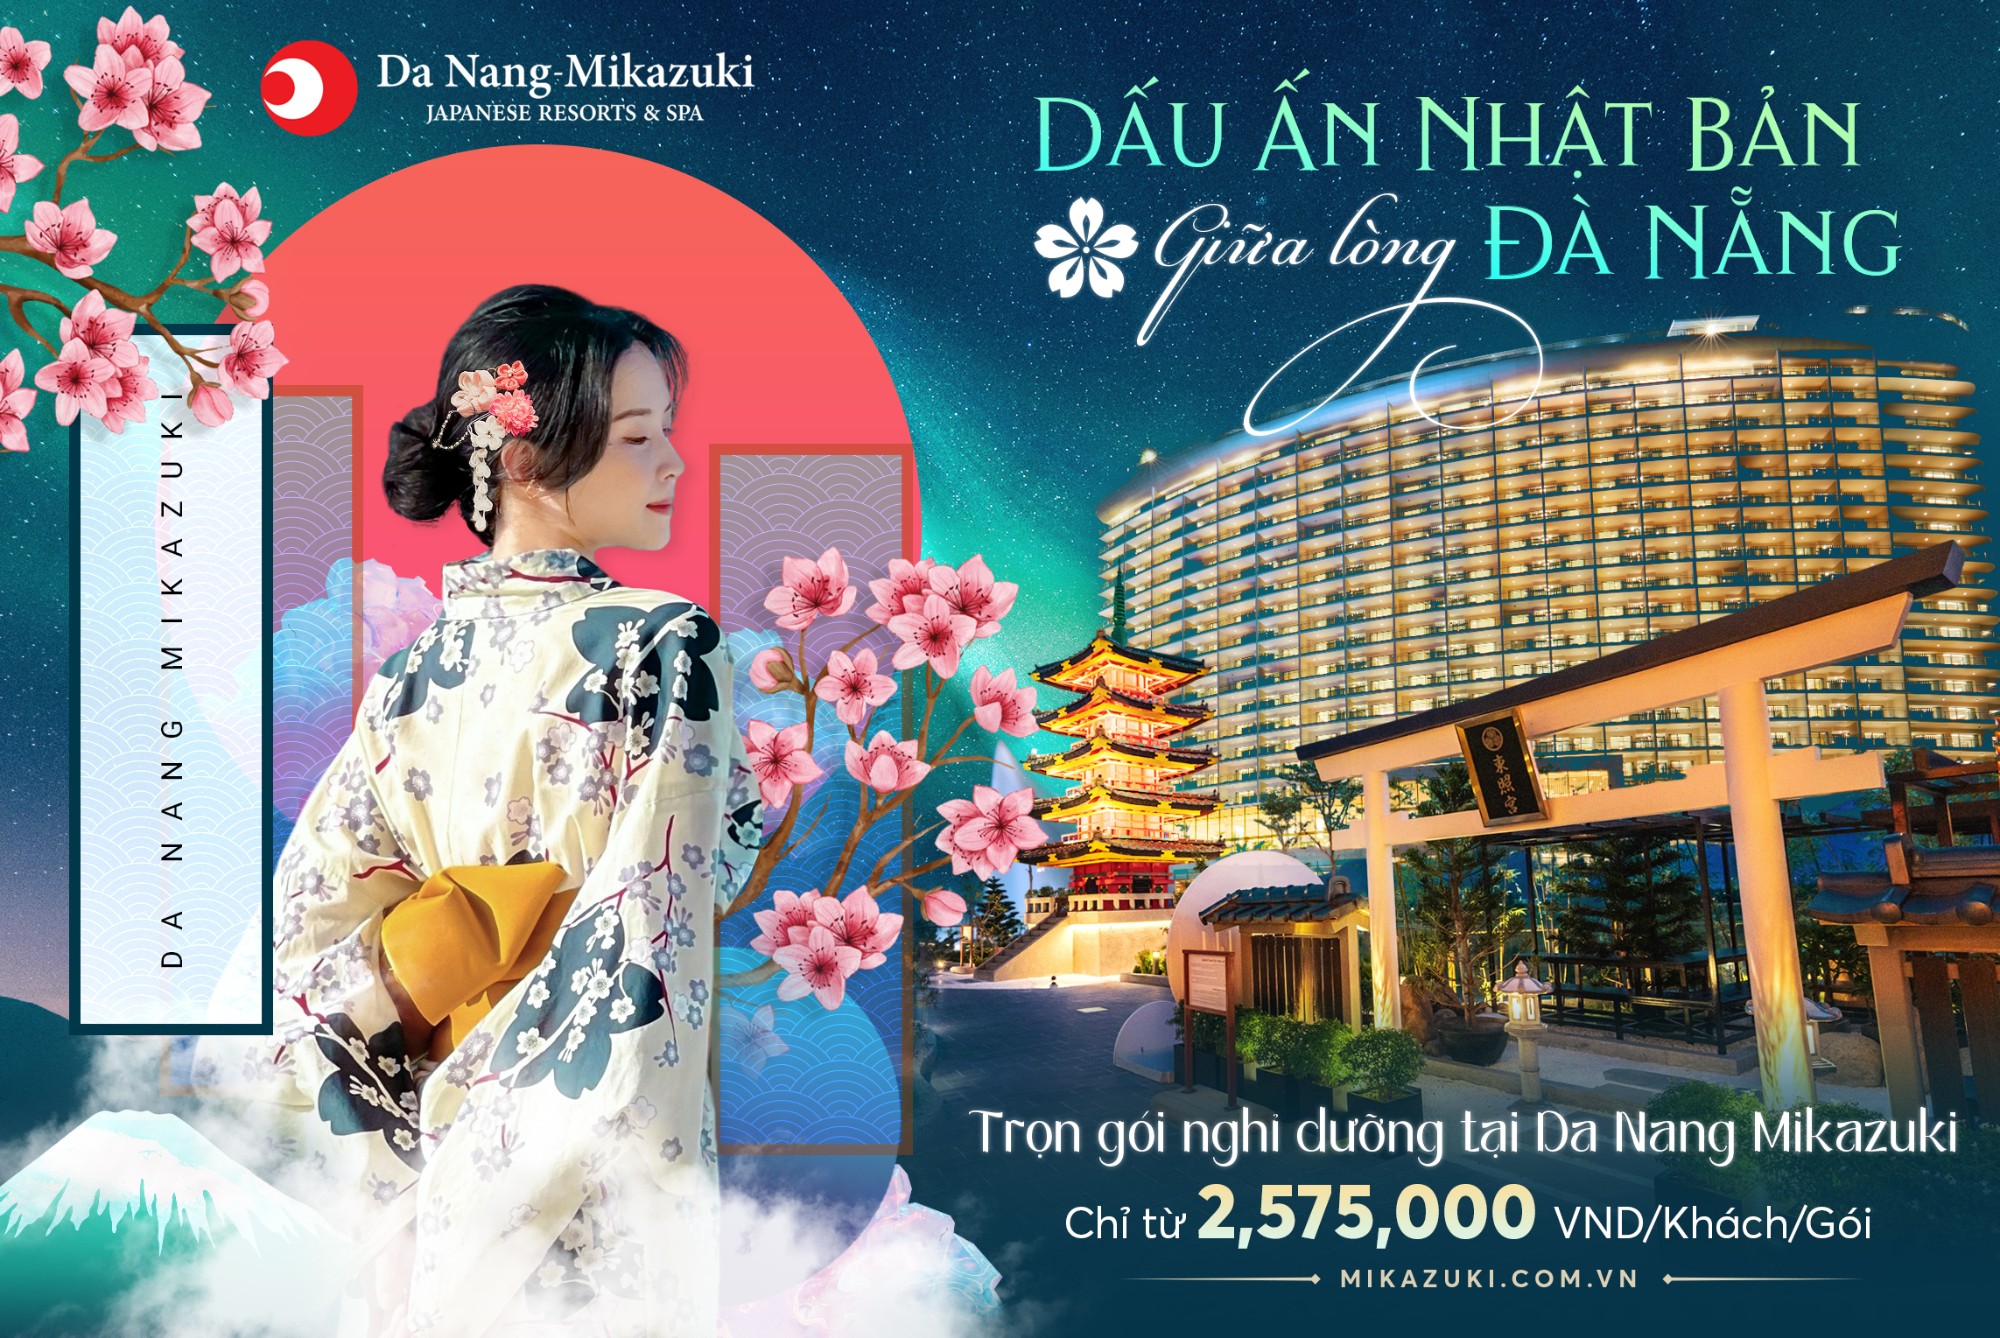 INDULGE YOUR STAY AT A MINIMAL JAPAN RIGHT IN DA NANG ONLY FROM 2,575,000VND/PAX/PACKAGE